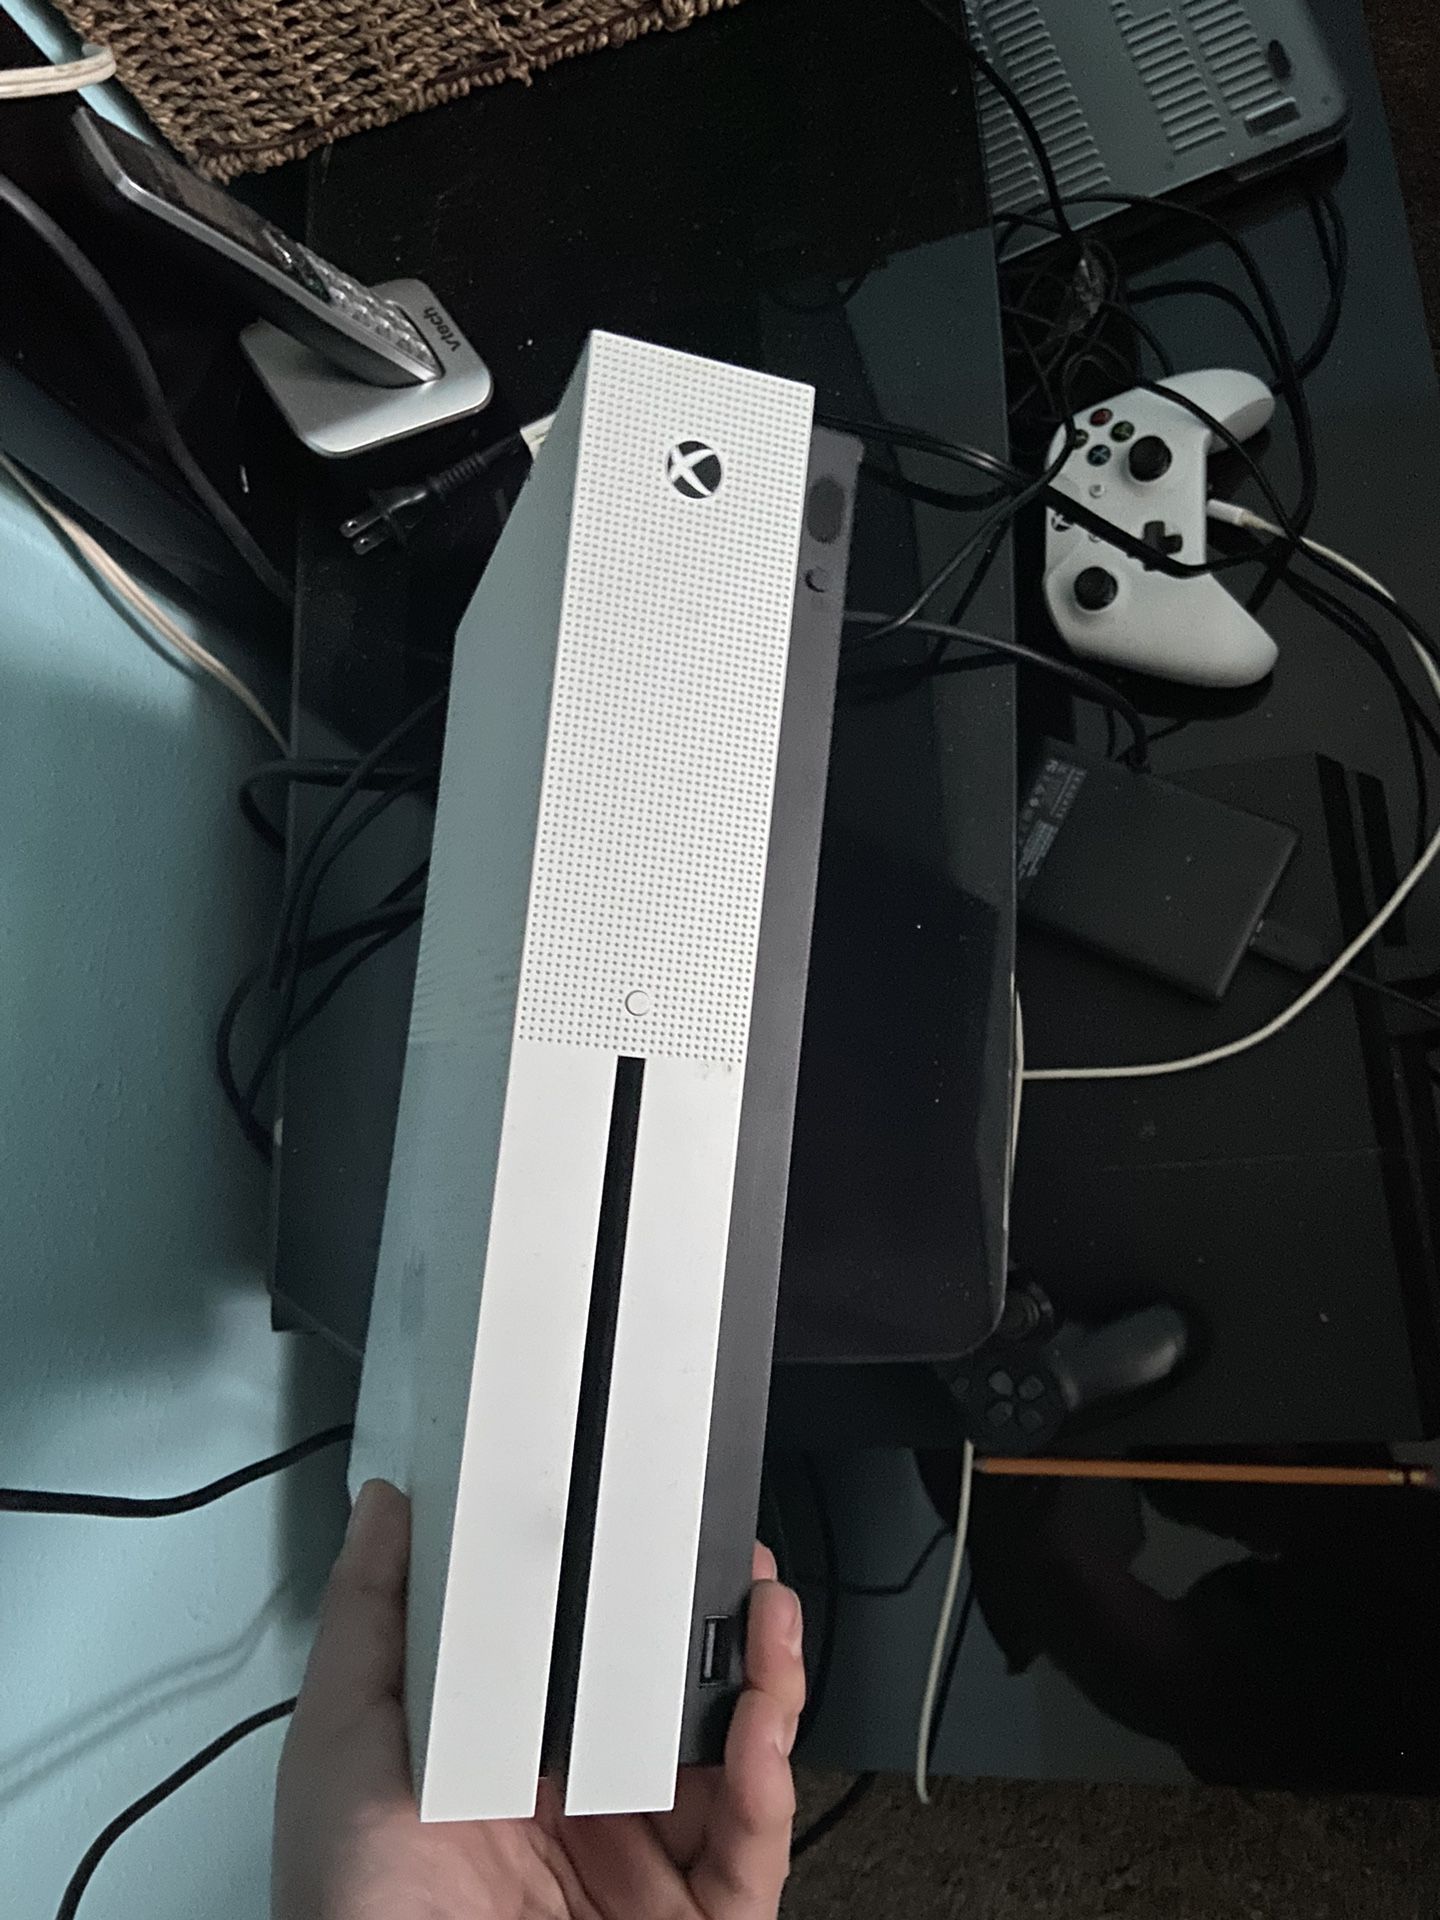 Xbox One S With Games And Controller